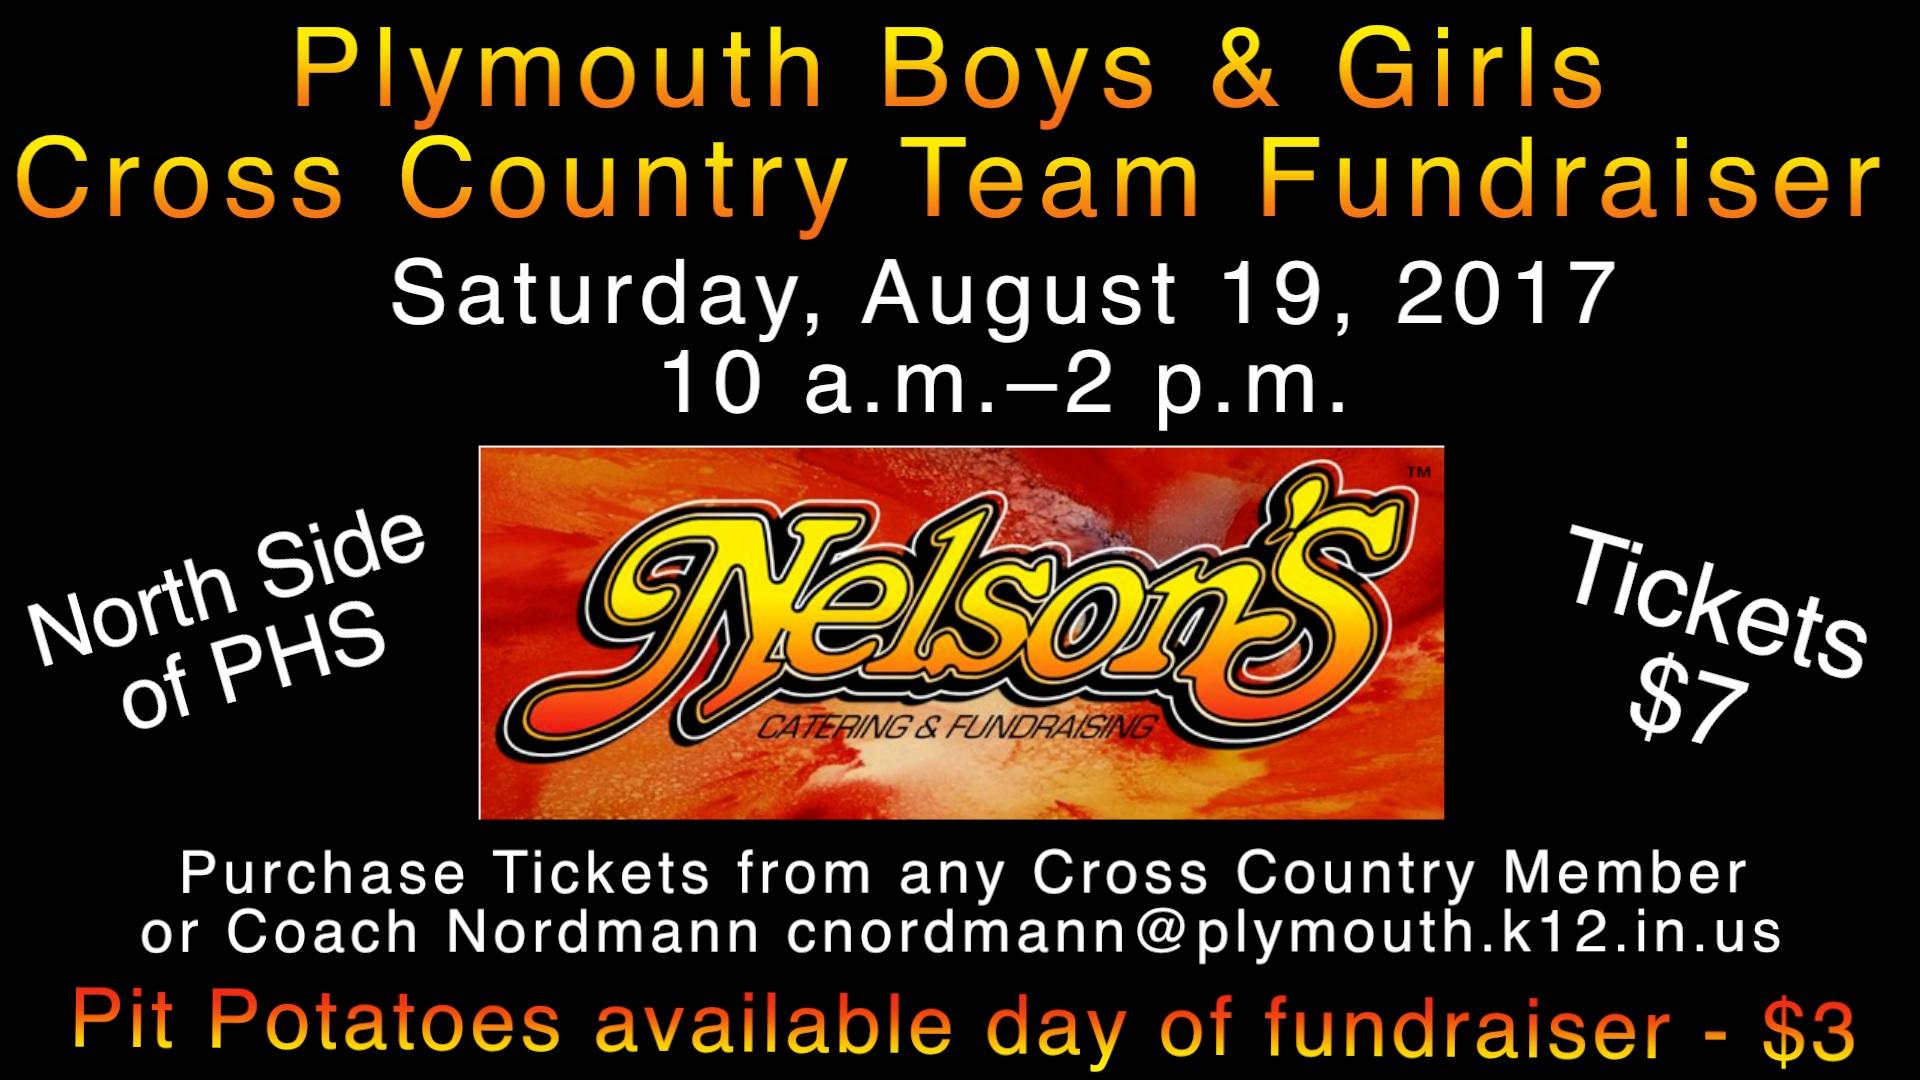 Plymouth Boys & Girls Cross Country Team Fundraiser Information